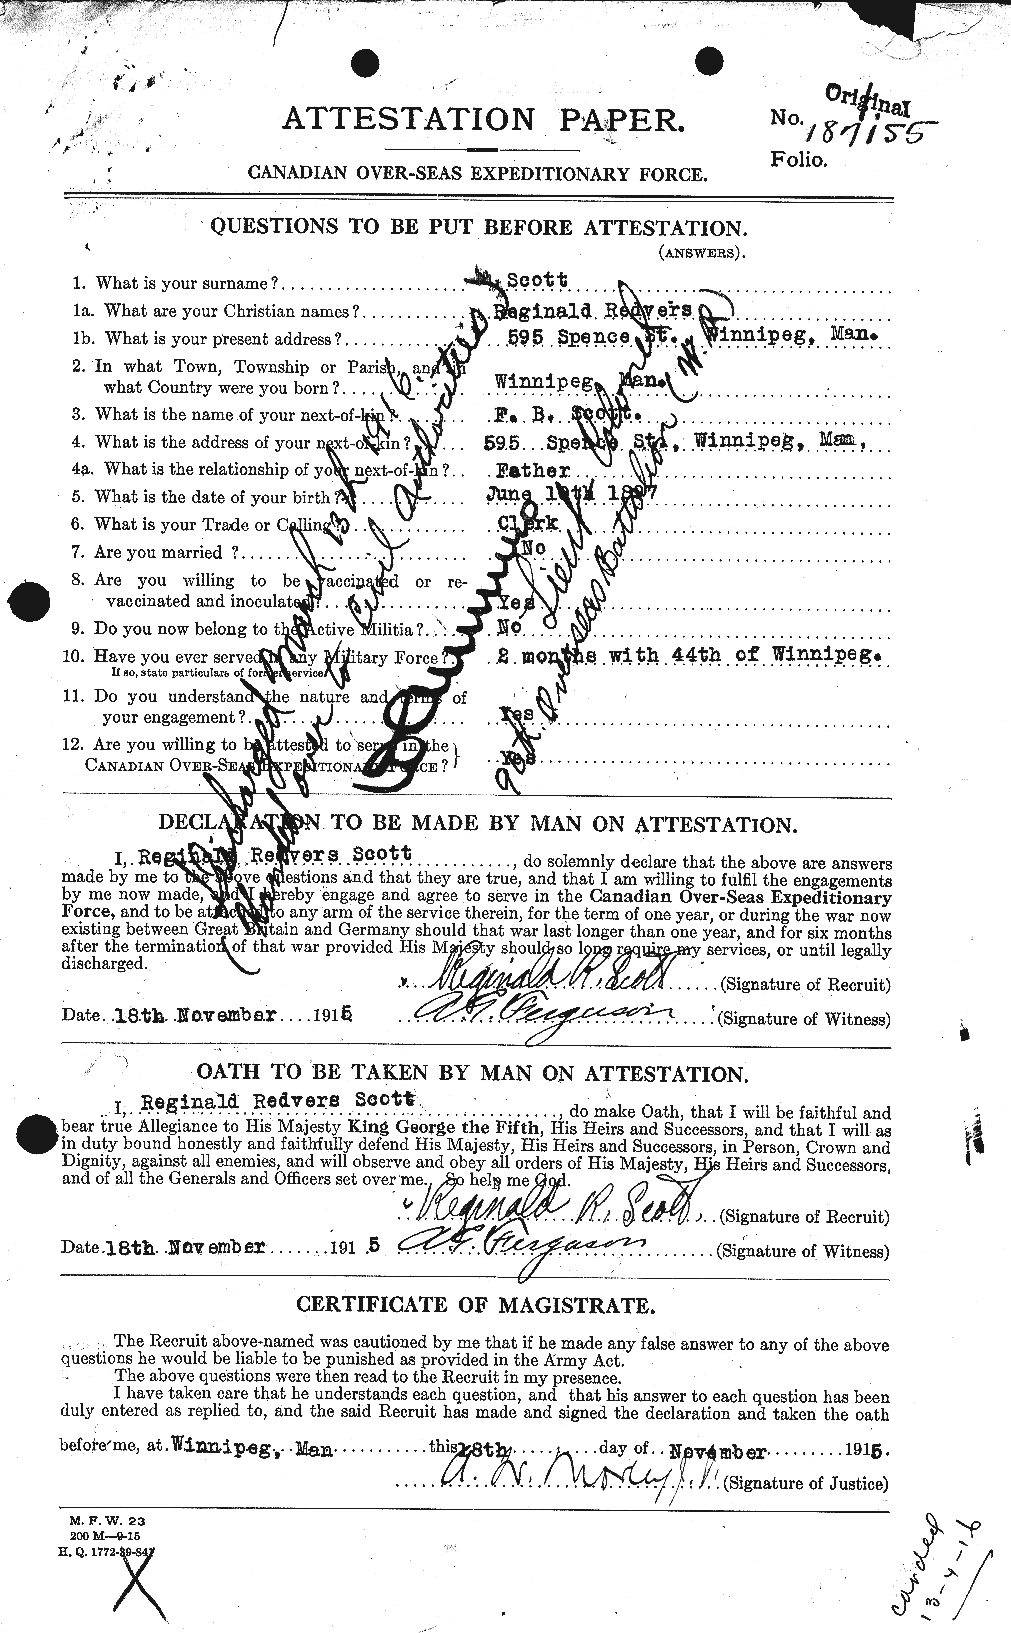 Personnel Records of the First World War - CEF 090191a